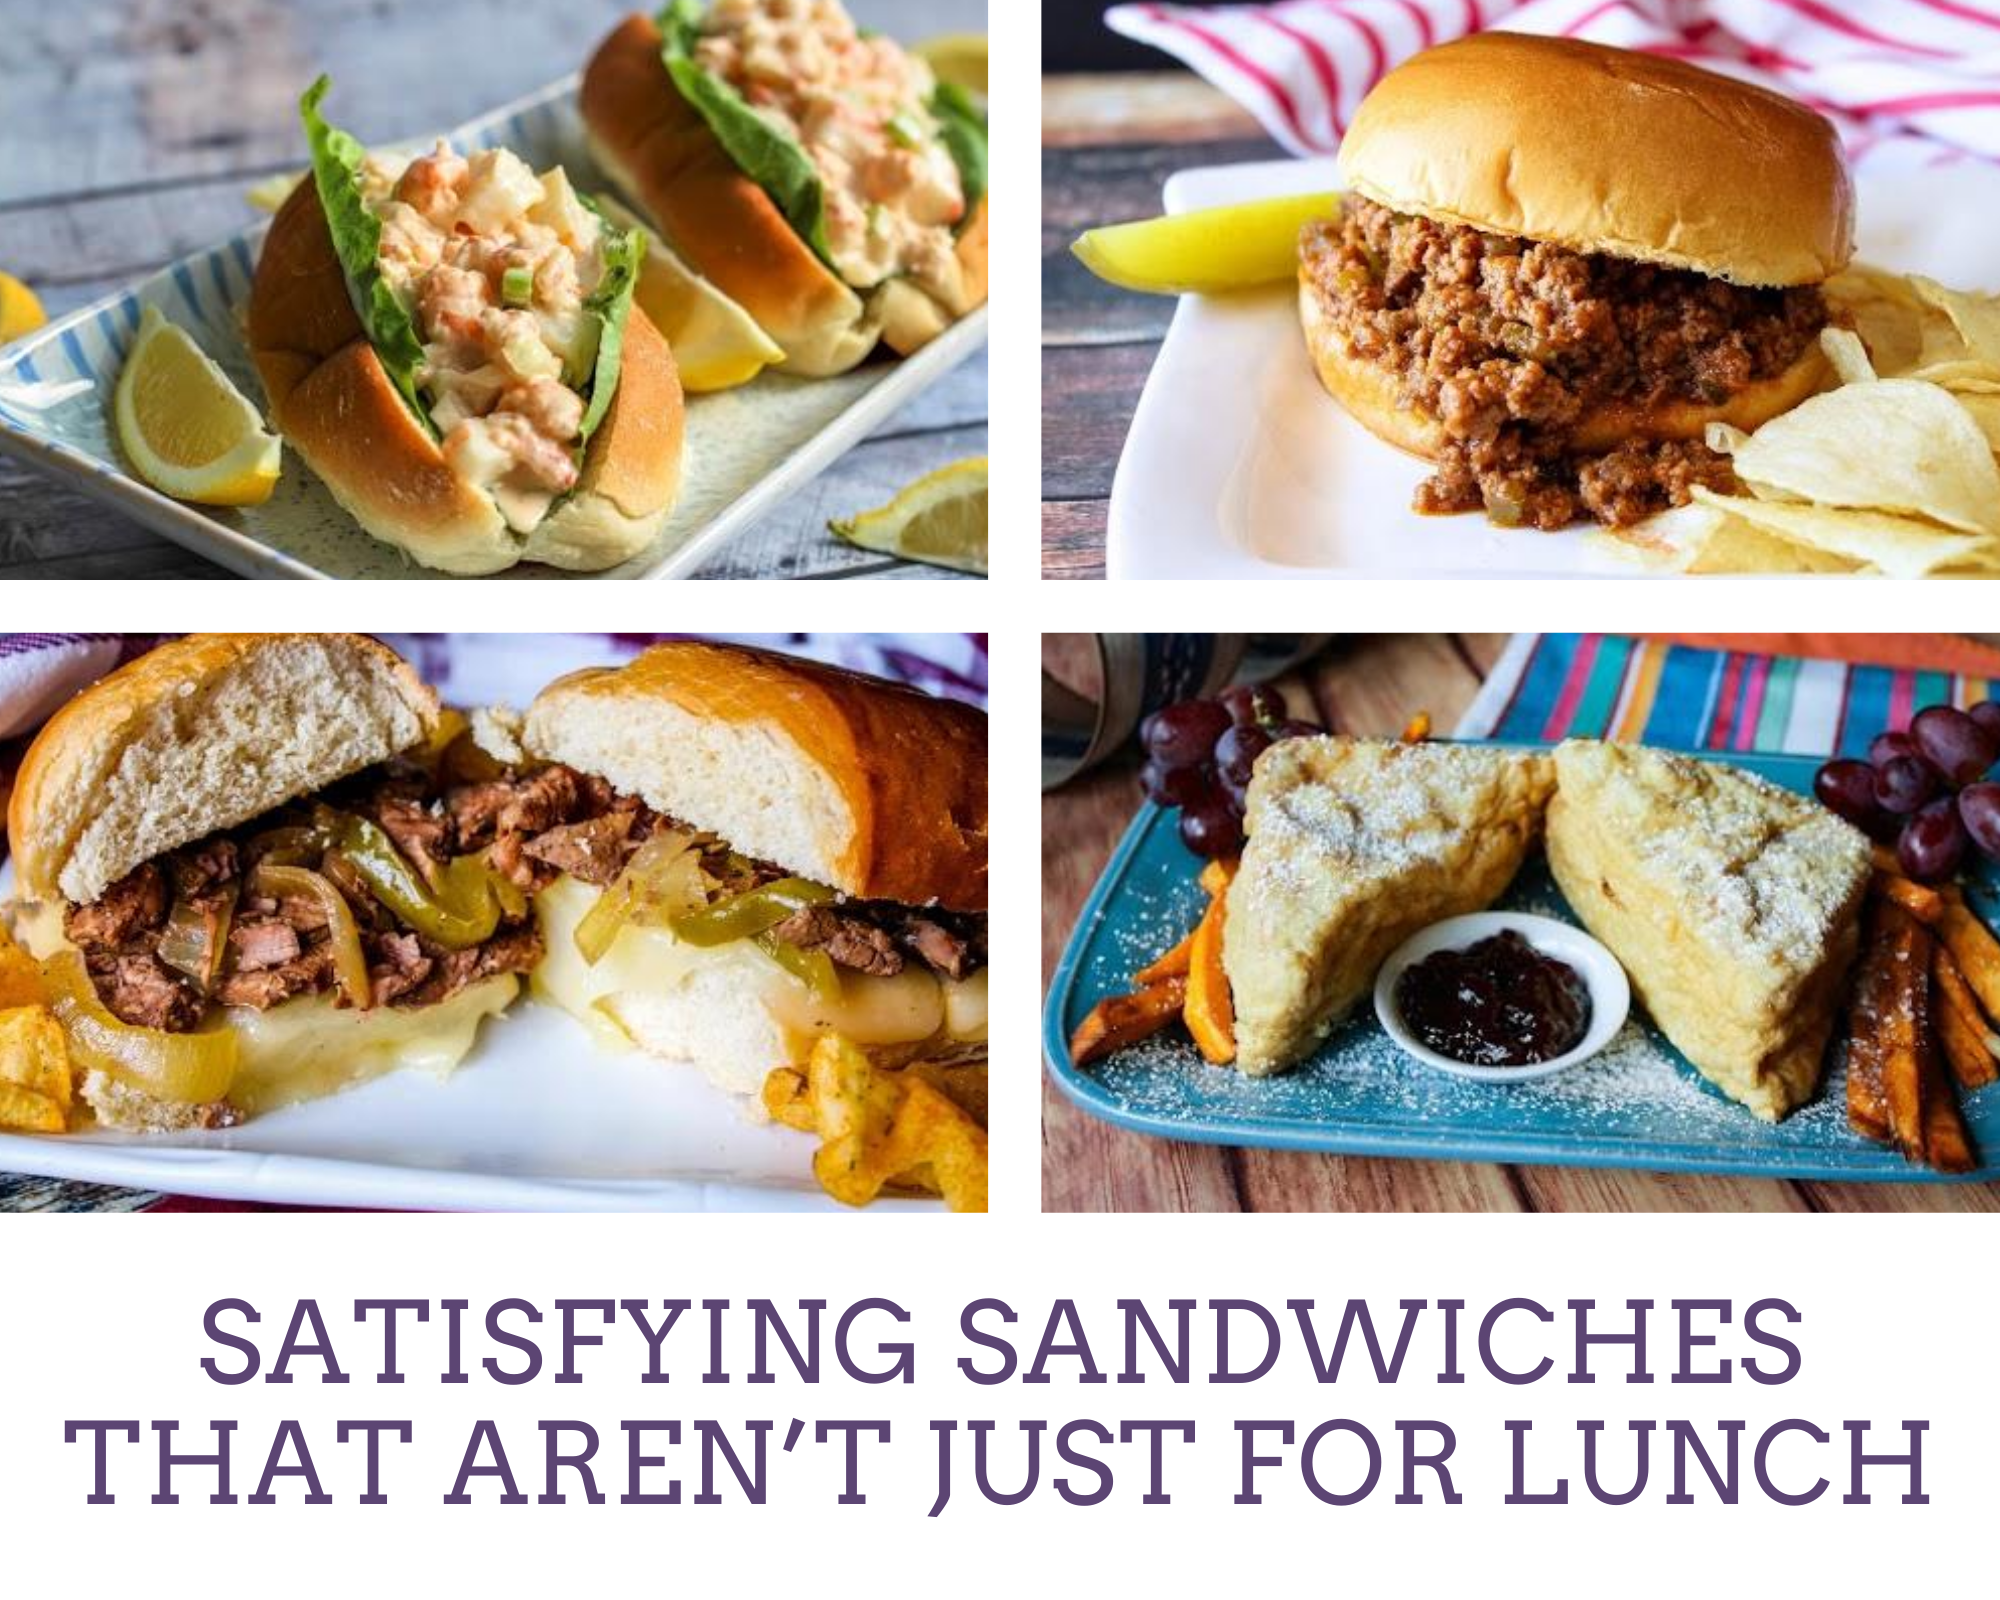 Sloppy joes, philly cheesesteak sandwiches, monte cristo sandwiches and lobster rolls